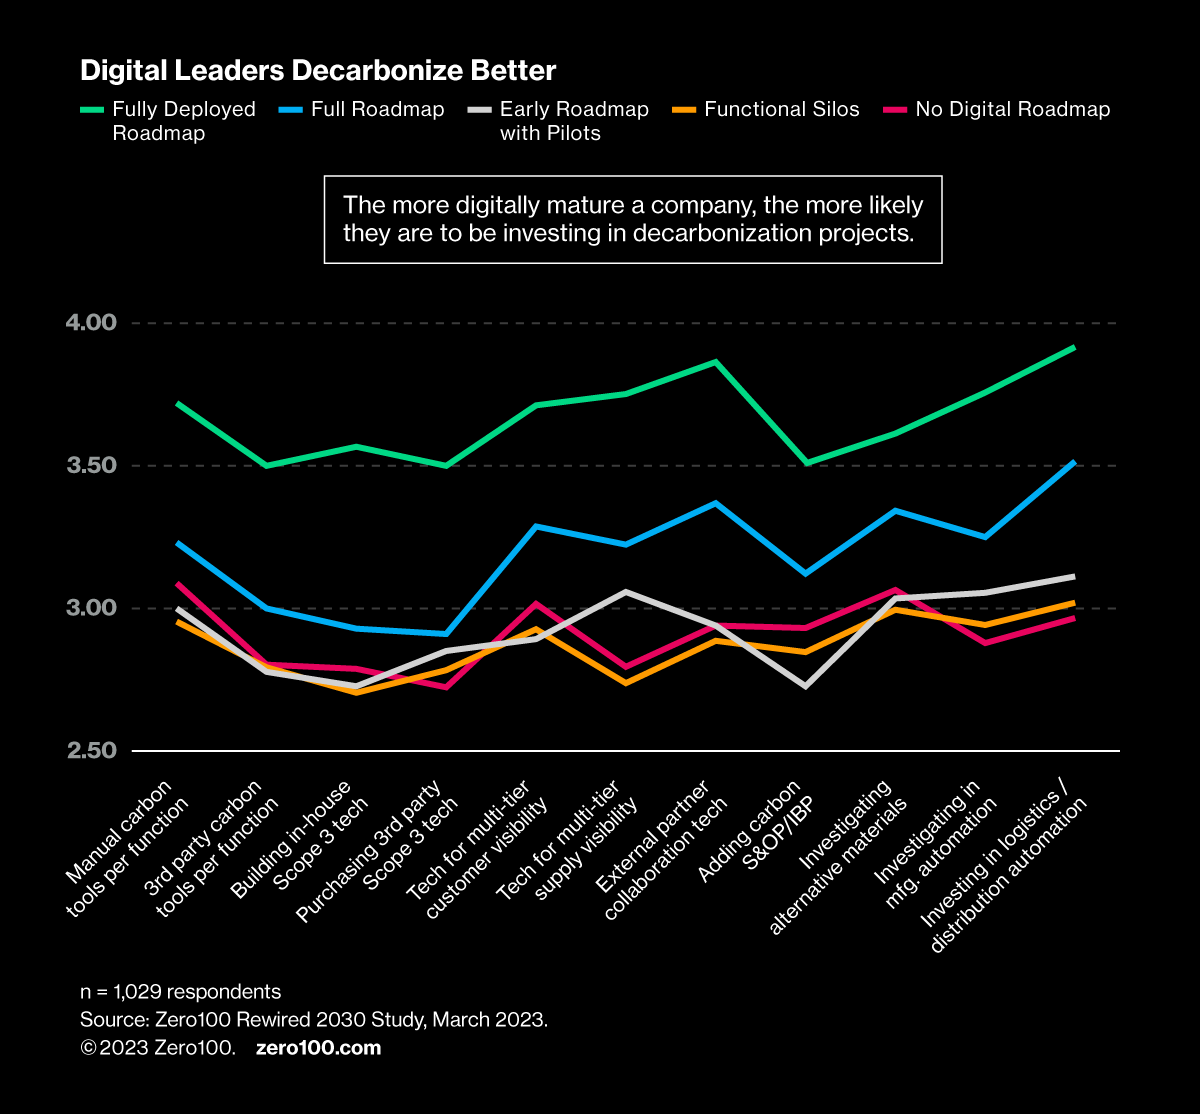 Graph depicting how digital leaders decarbonize better than others, demonstrating that the more digitally mature a company, the more likely they are to be investing in decarbonization projects. Source: Zero100 Rewired 2030 Study, March 2023.